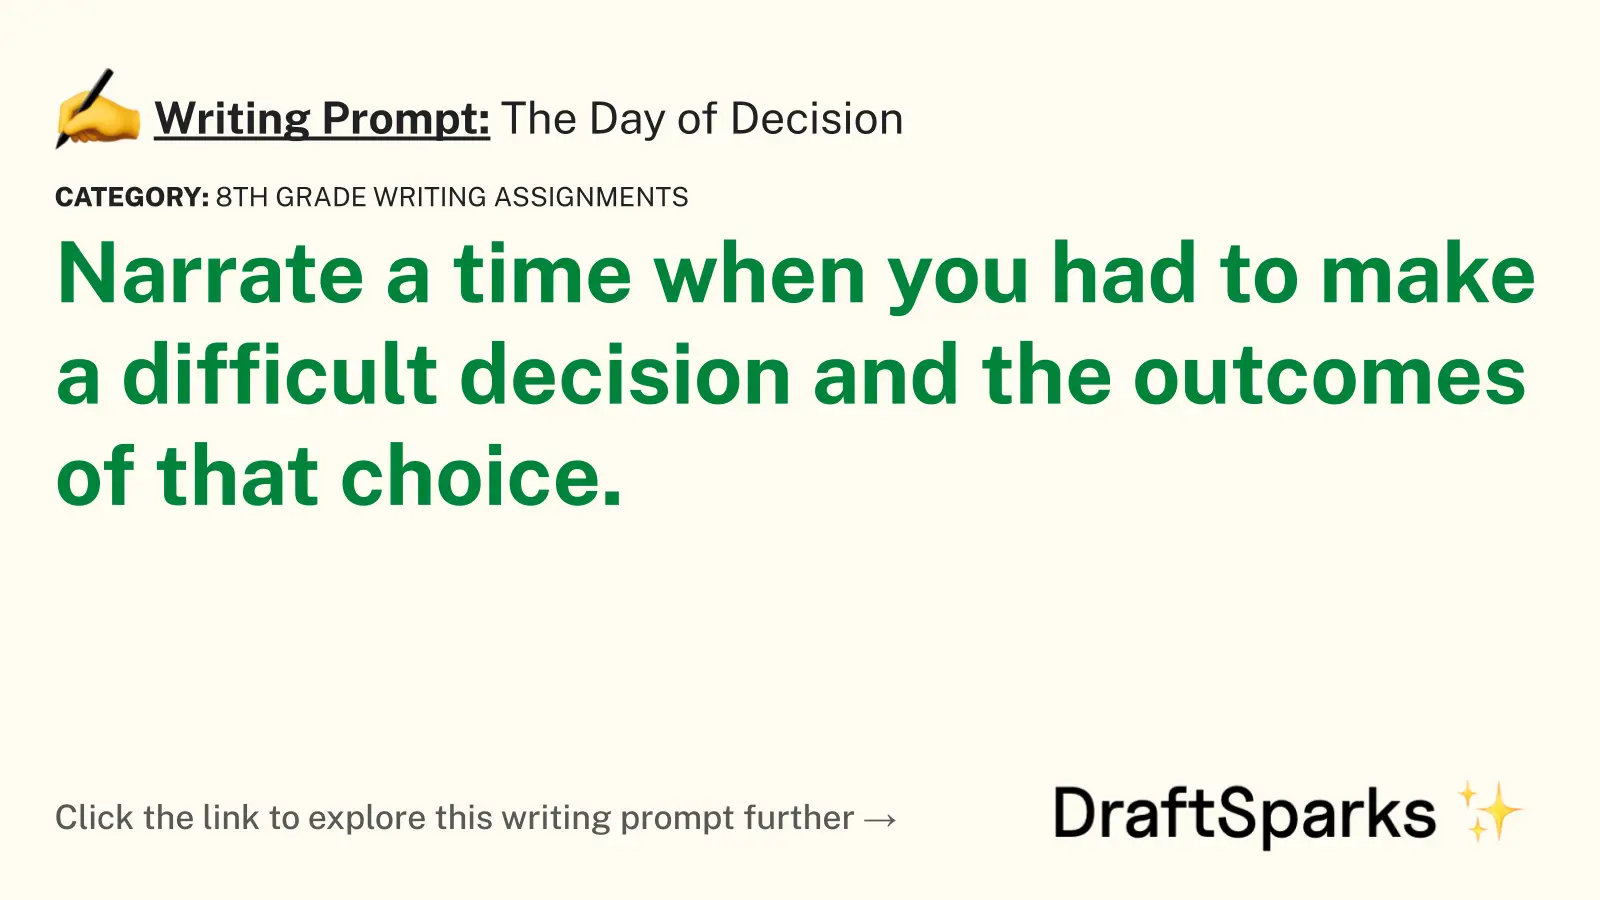 The Day of Decision